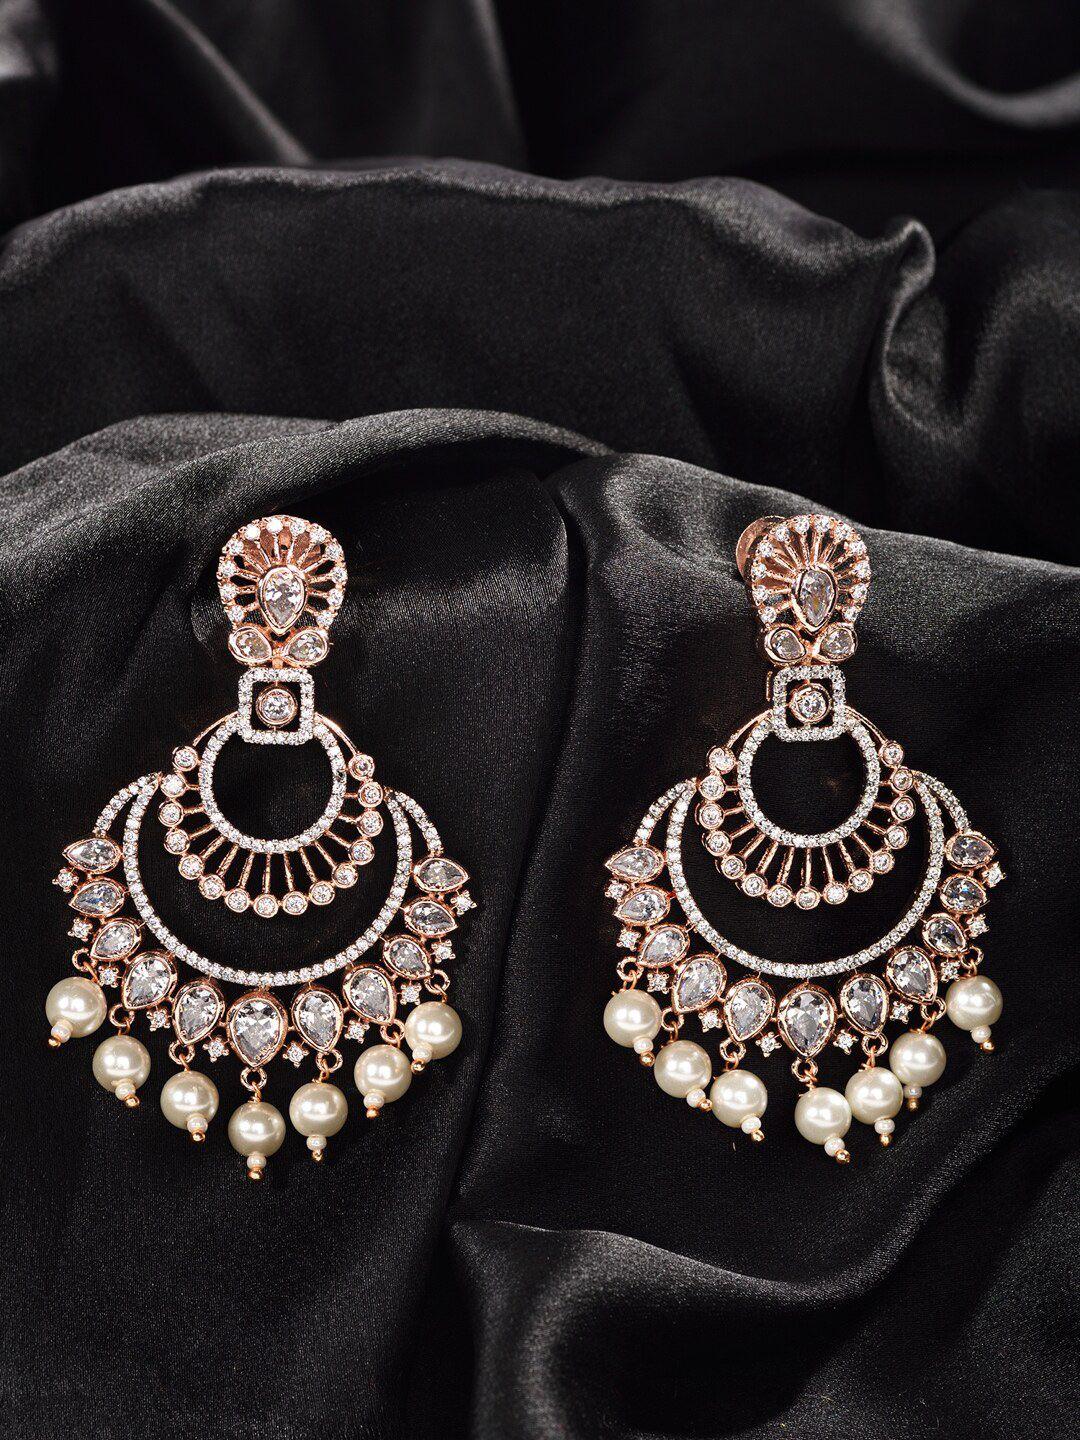 saraf rs jewellery white contemporary chandbalis earrings